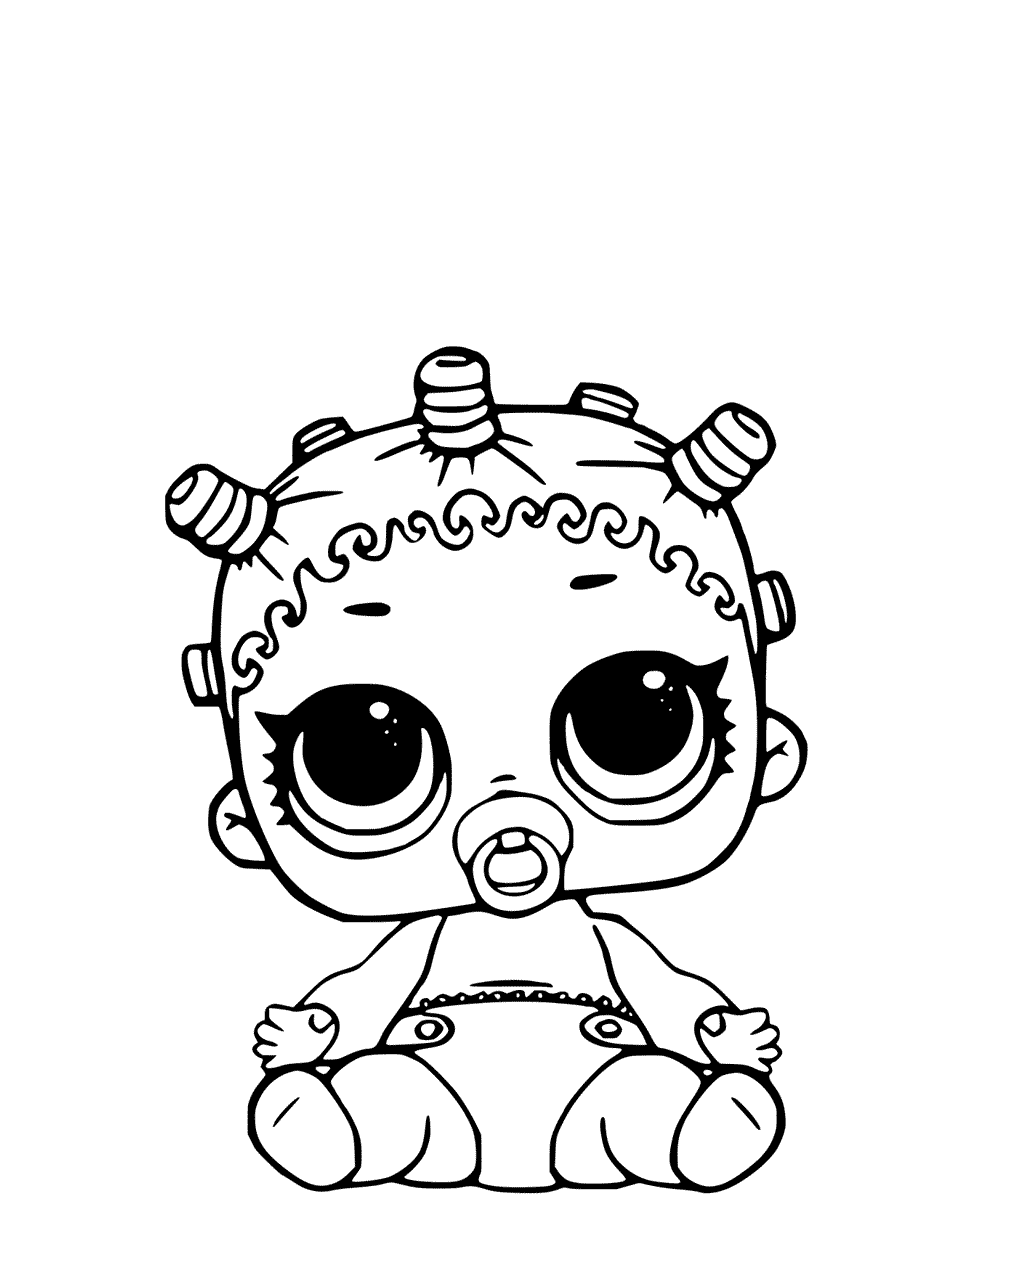 Lil Roller Sk20ter Coloring Page LOL Doll Coloring Pages   Coloring ...